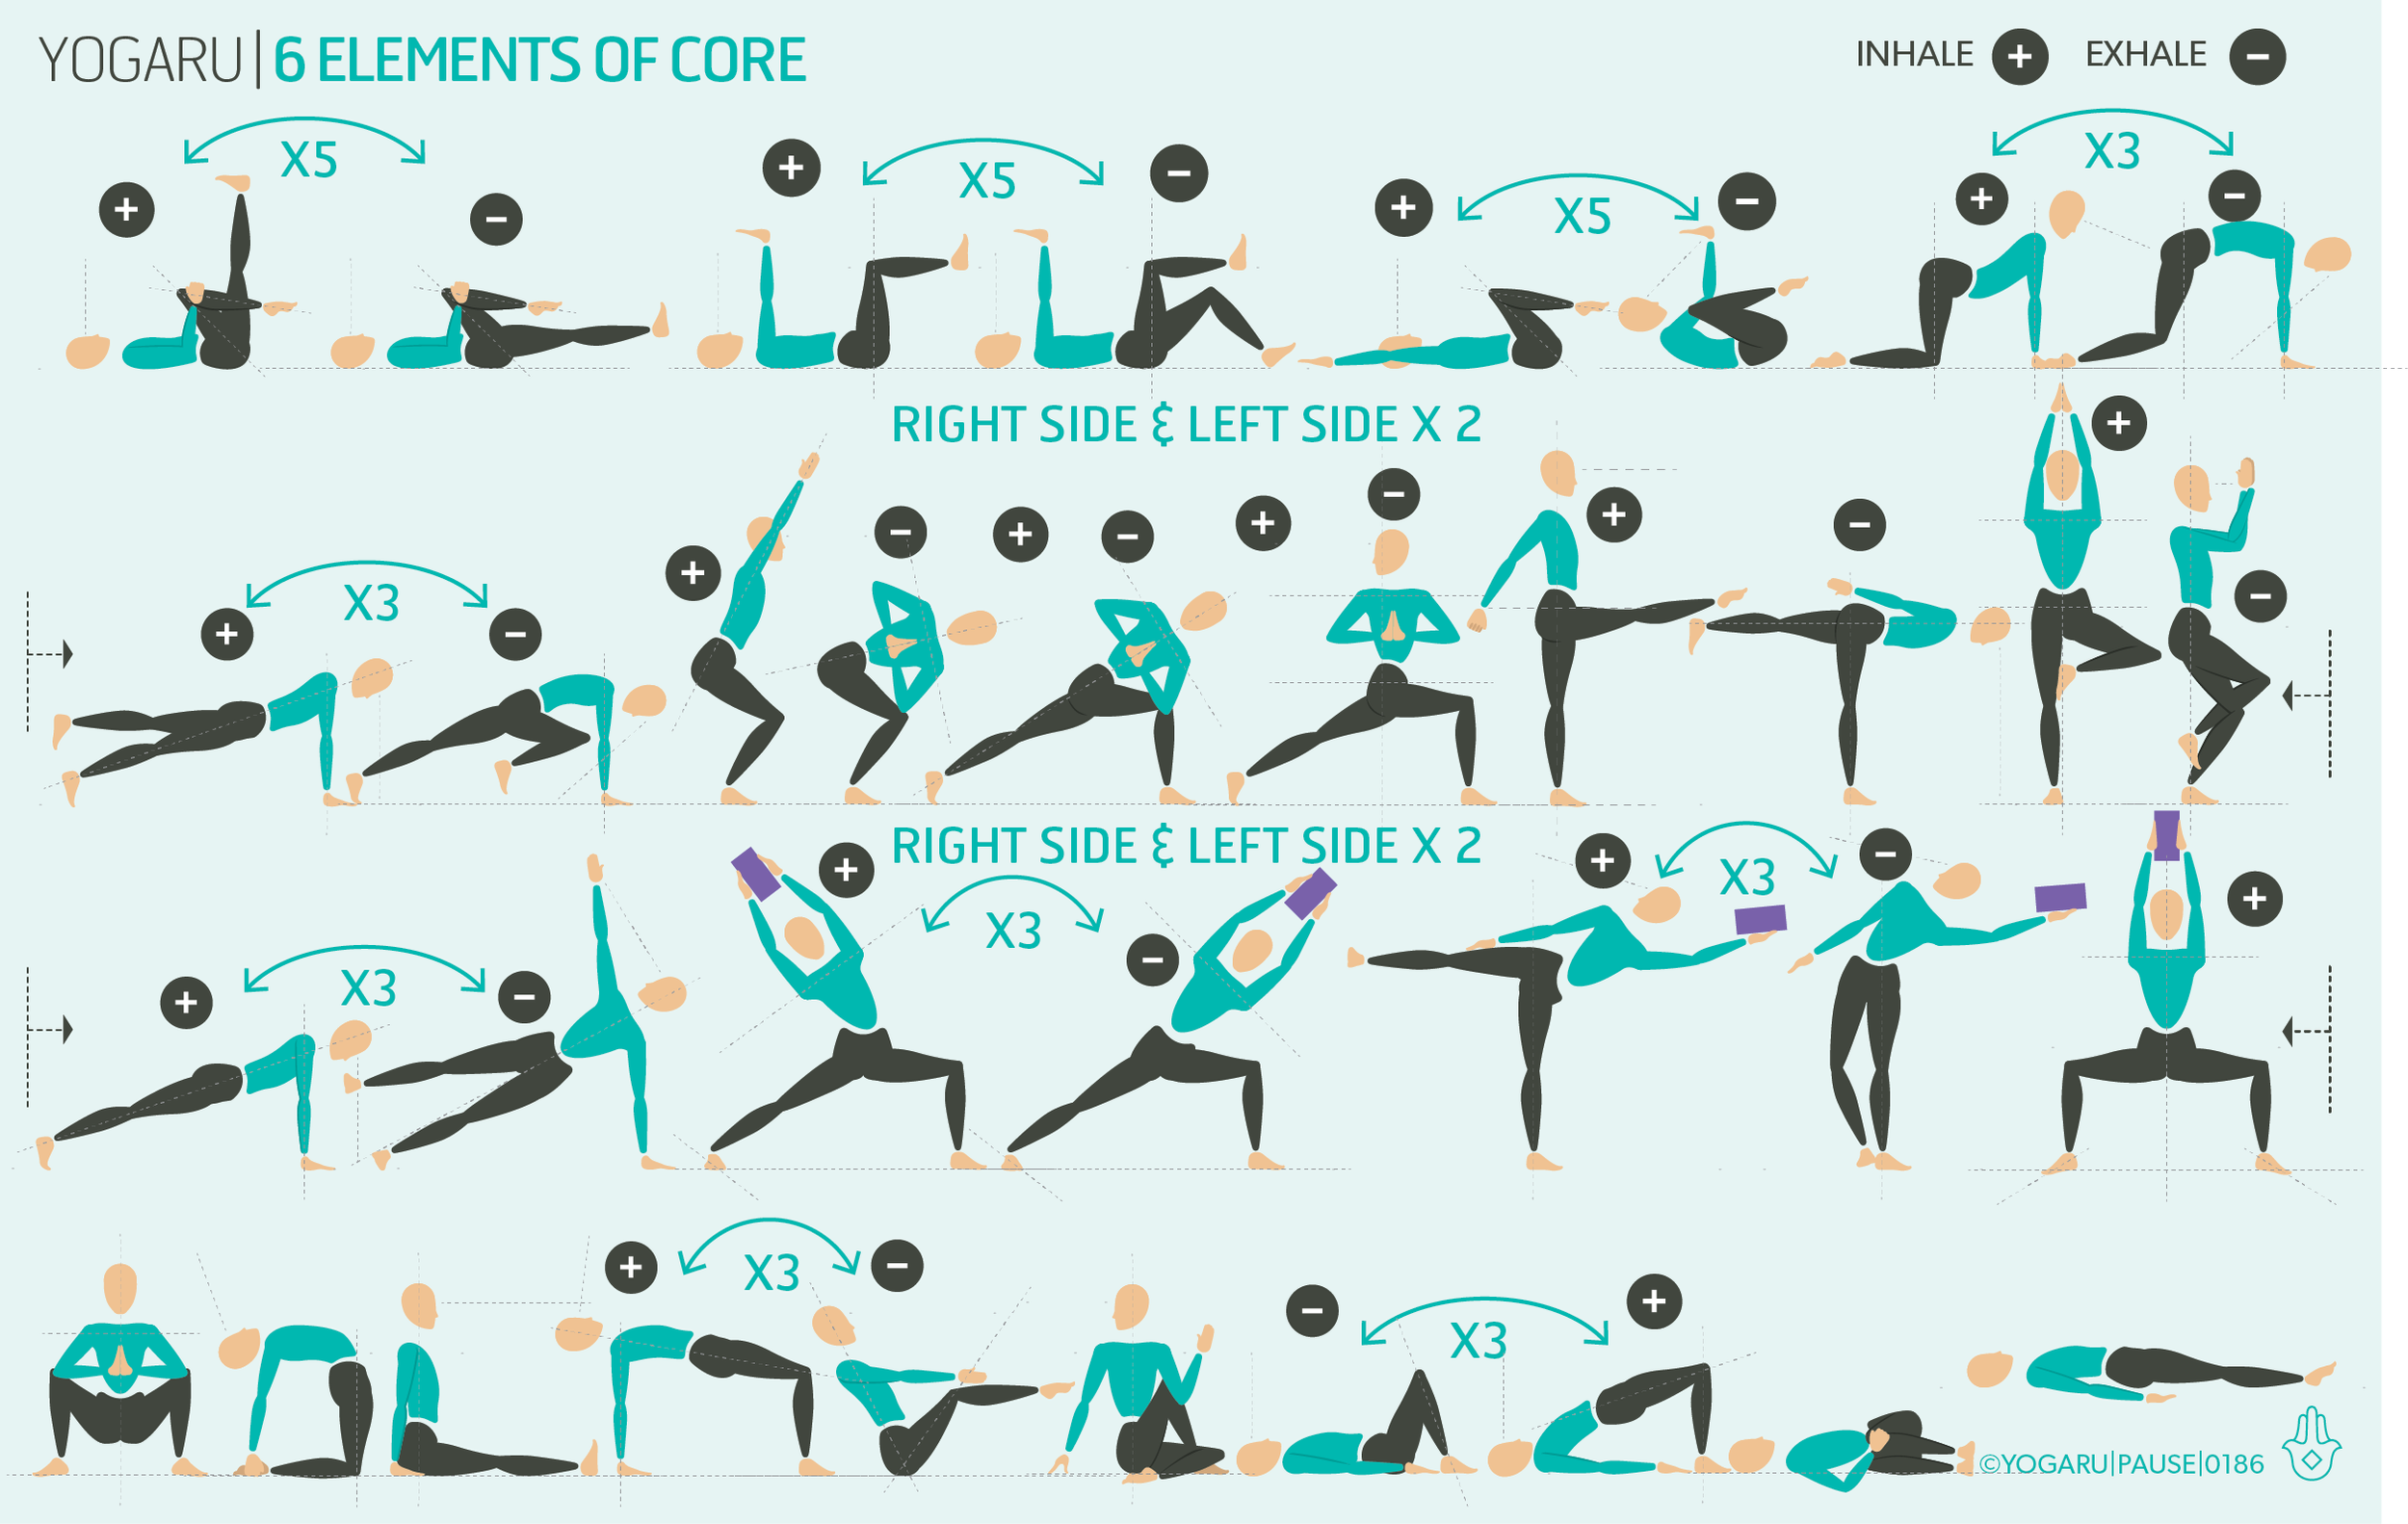 6 ELEMENTS OF CORE